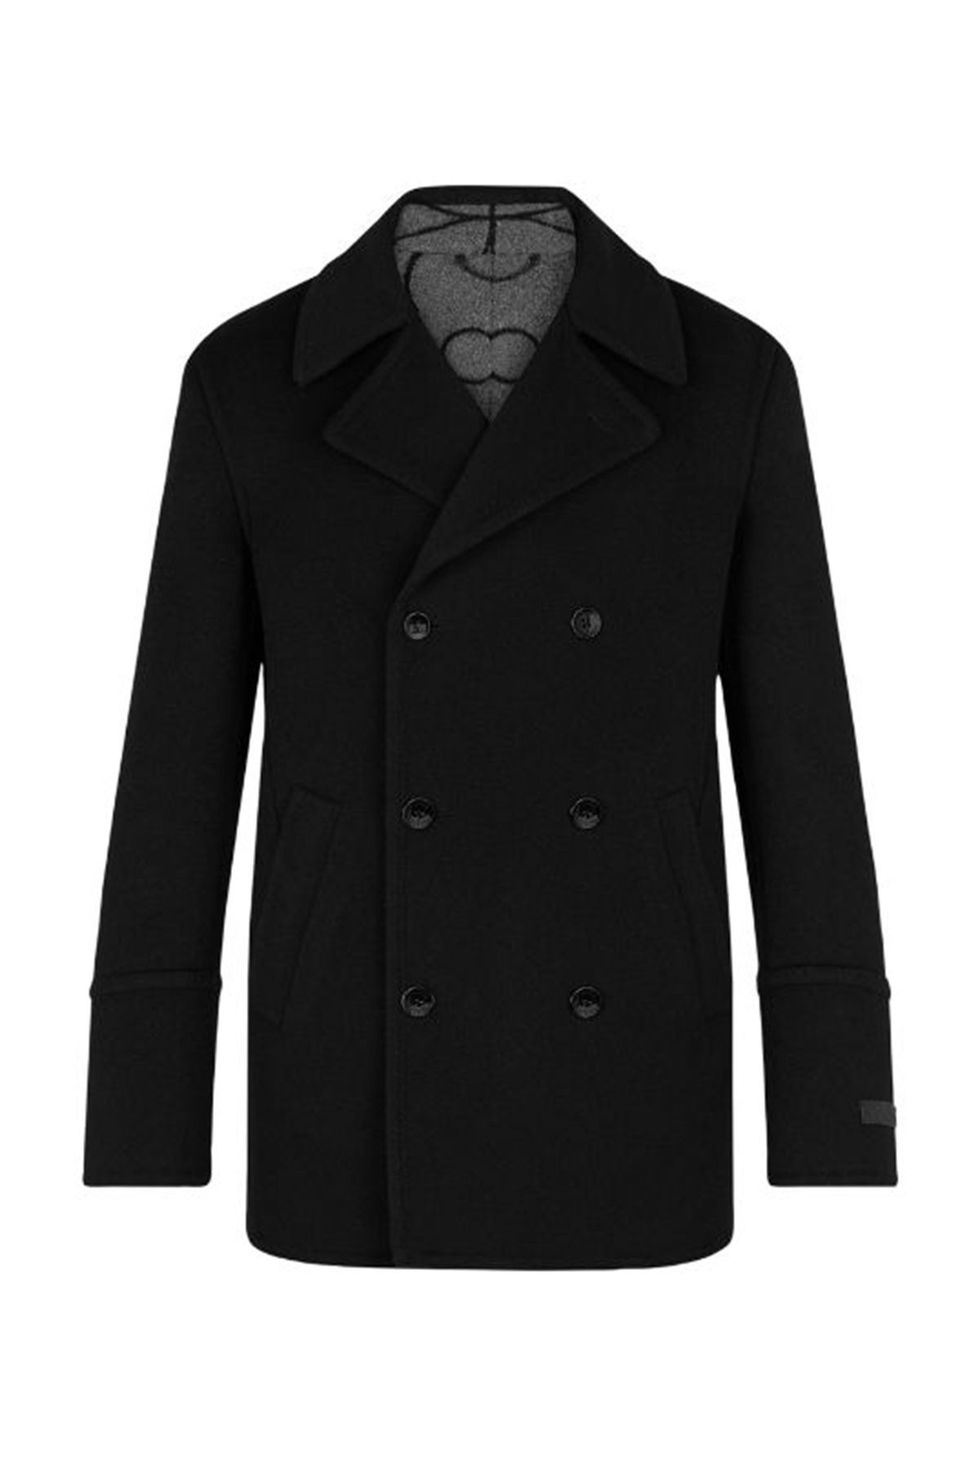 15 Stylish Peacoats for Men 2021 - Best Men's Peacoats to Complete Any ...